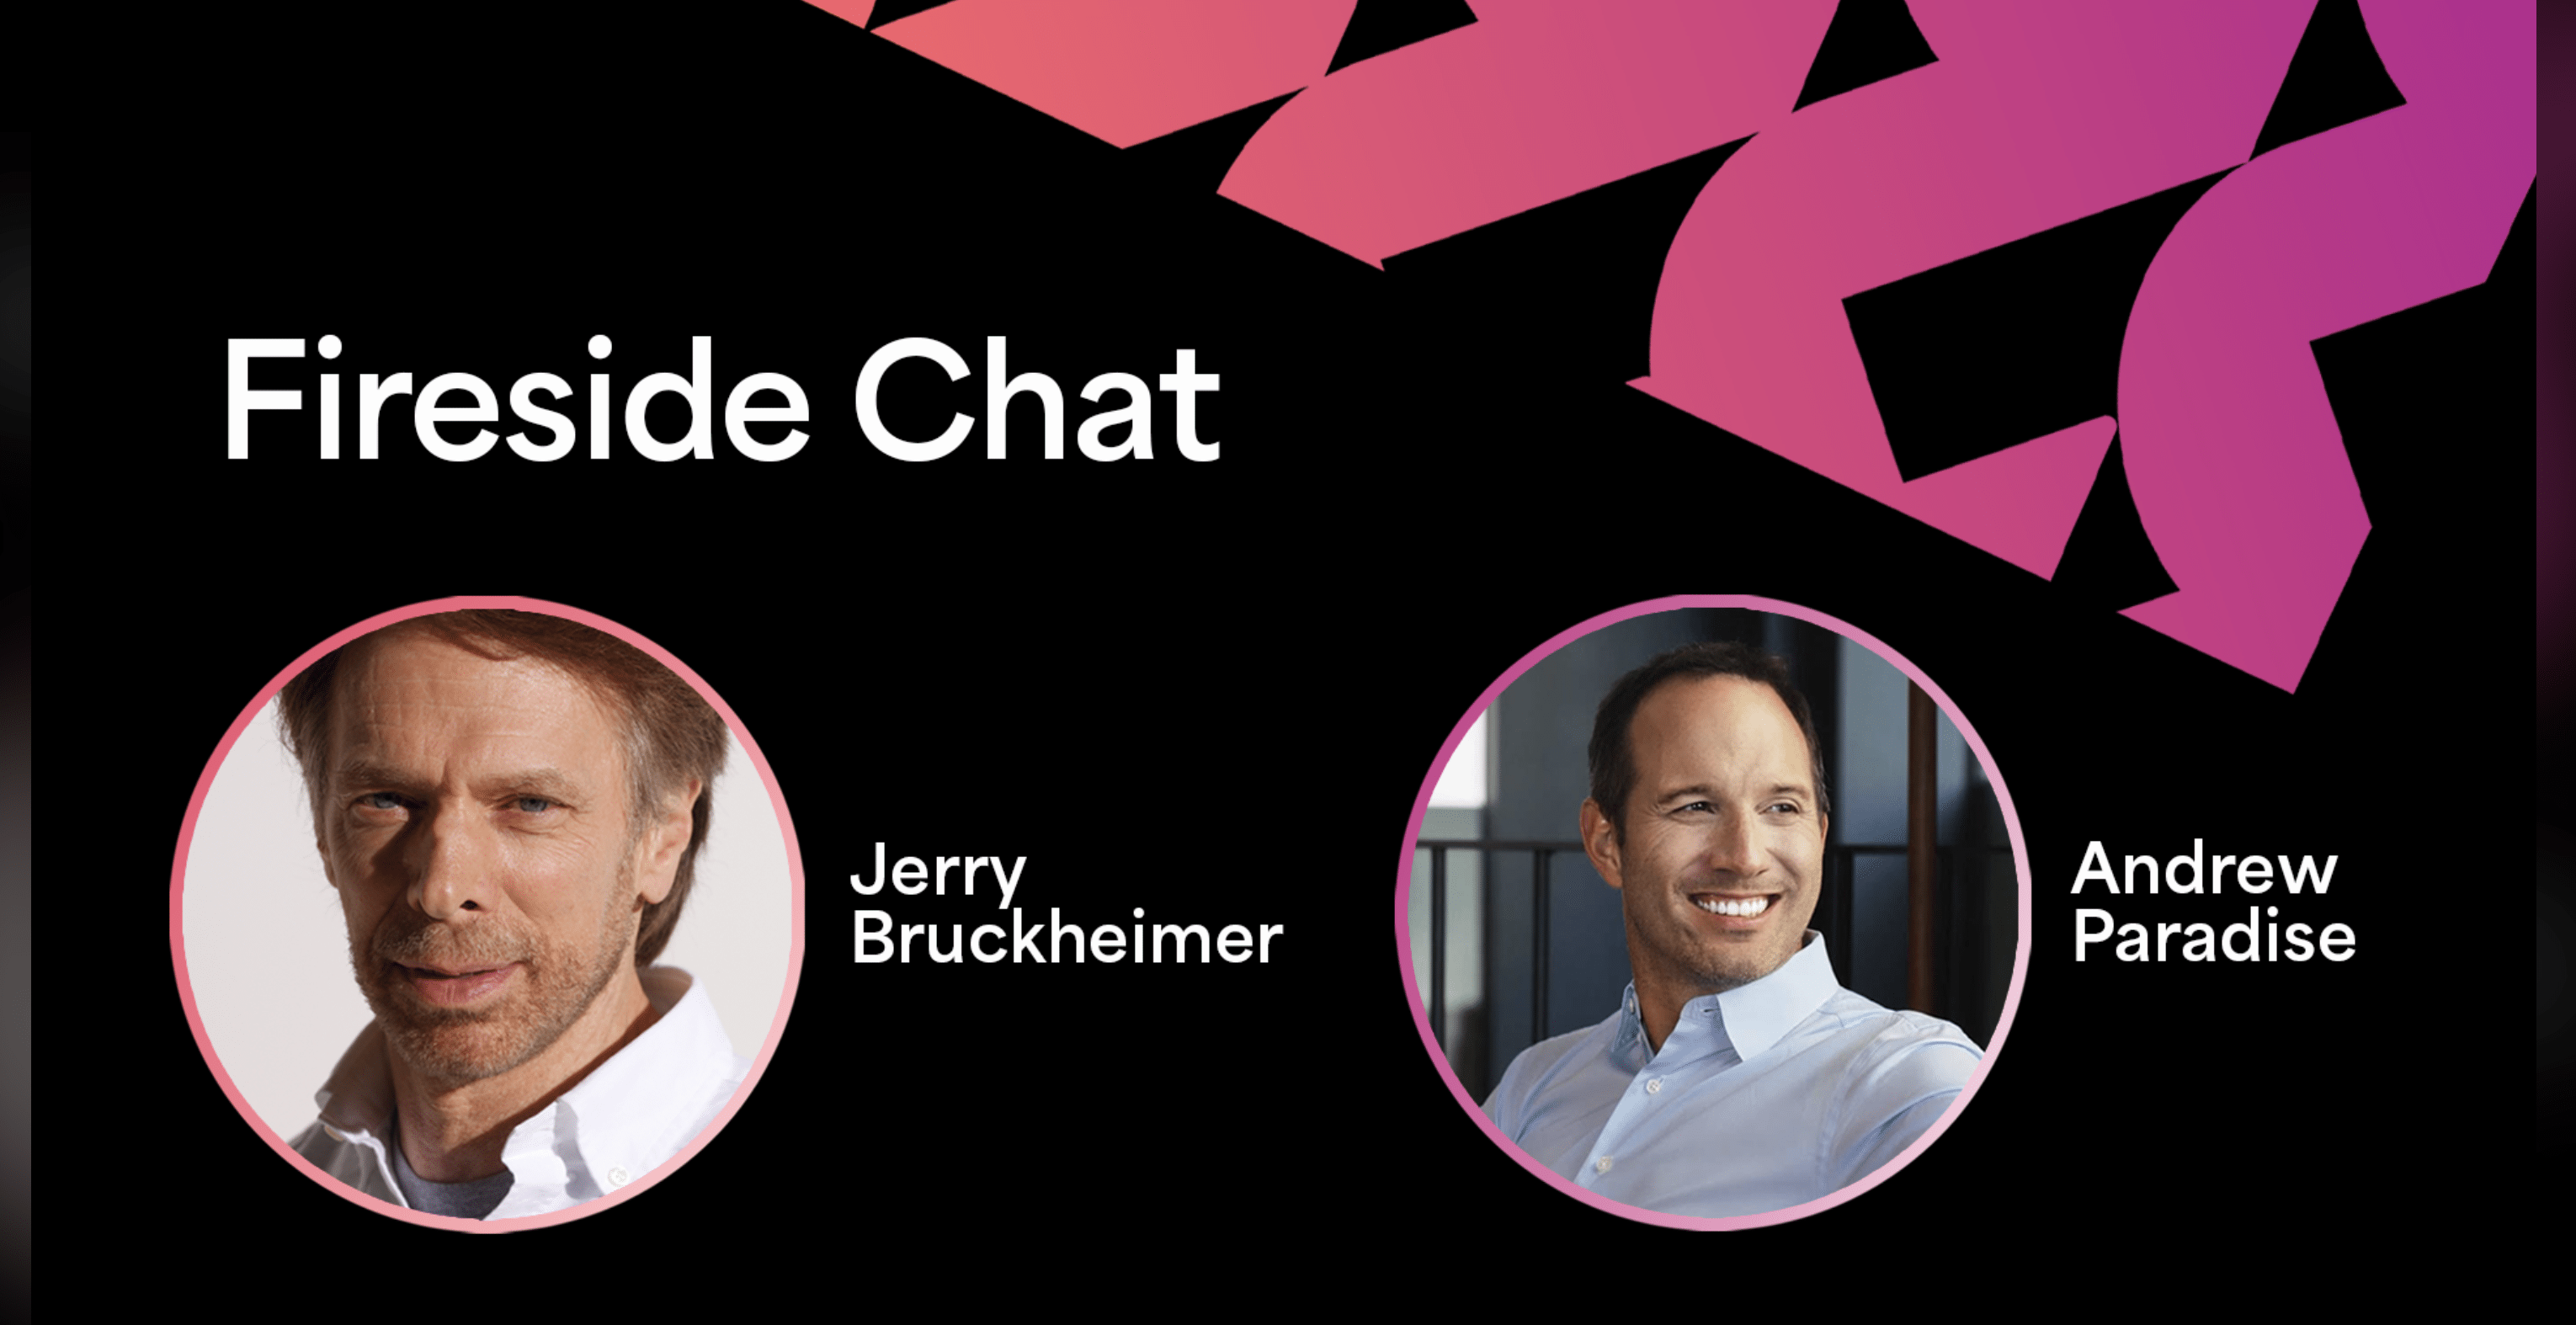 Fireside chat with Jerry Bruckheimer